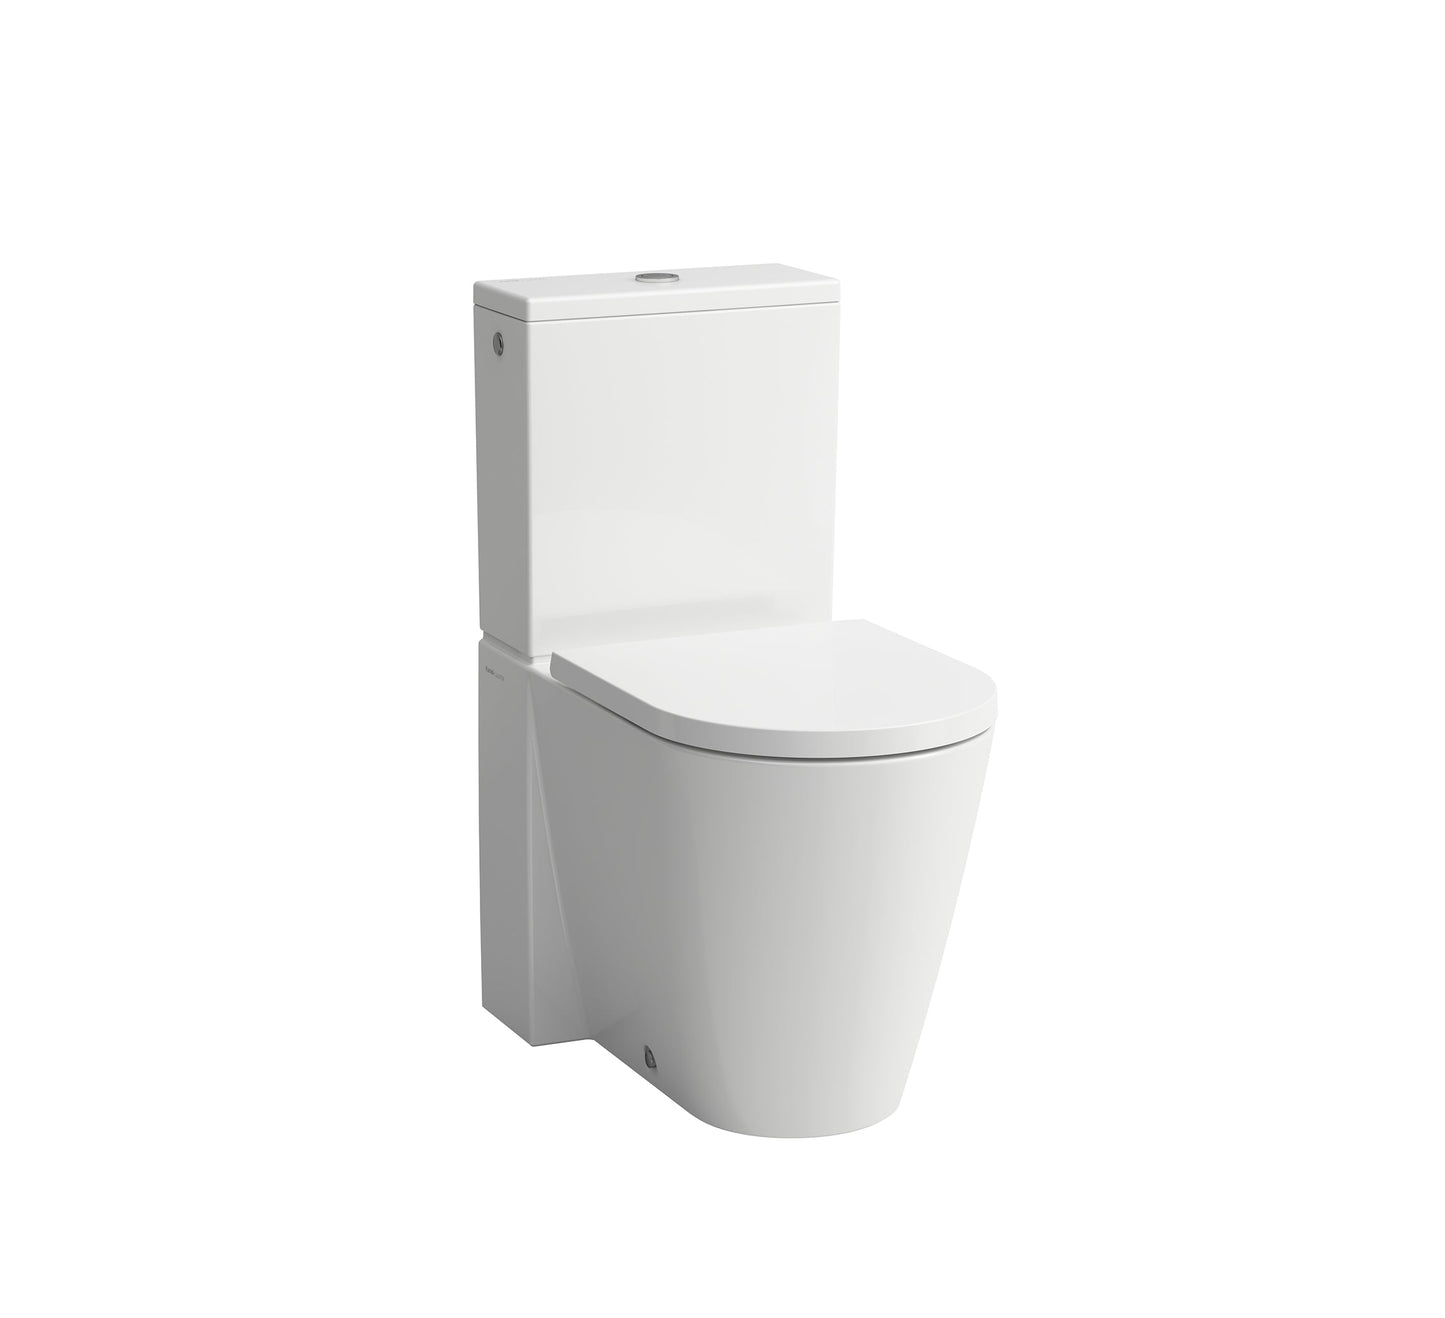 LAUFEN KARTELL FLOORSTANDING WC COMBINATION RIMLESS, WASHDOWN, BACK-TO-WALL HORIZONTAL OR VERTICAL OUTLET WHITE SAPHIRKERAMIK - 8.2433.7.000.231.1